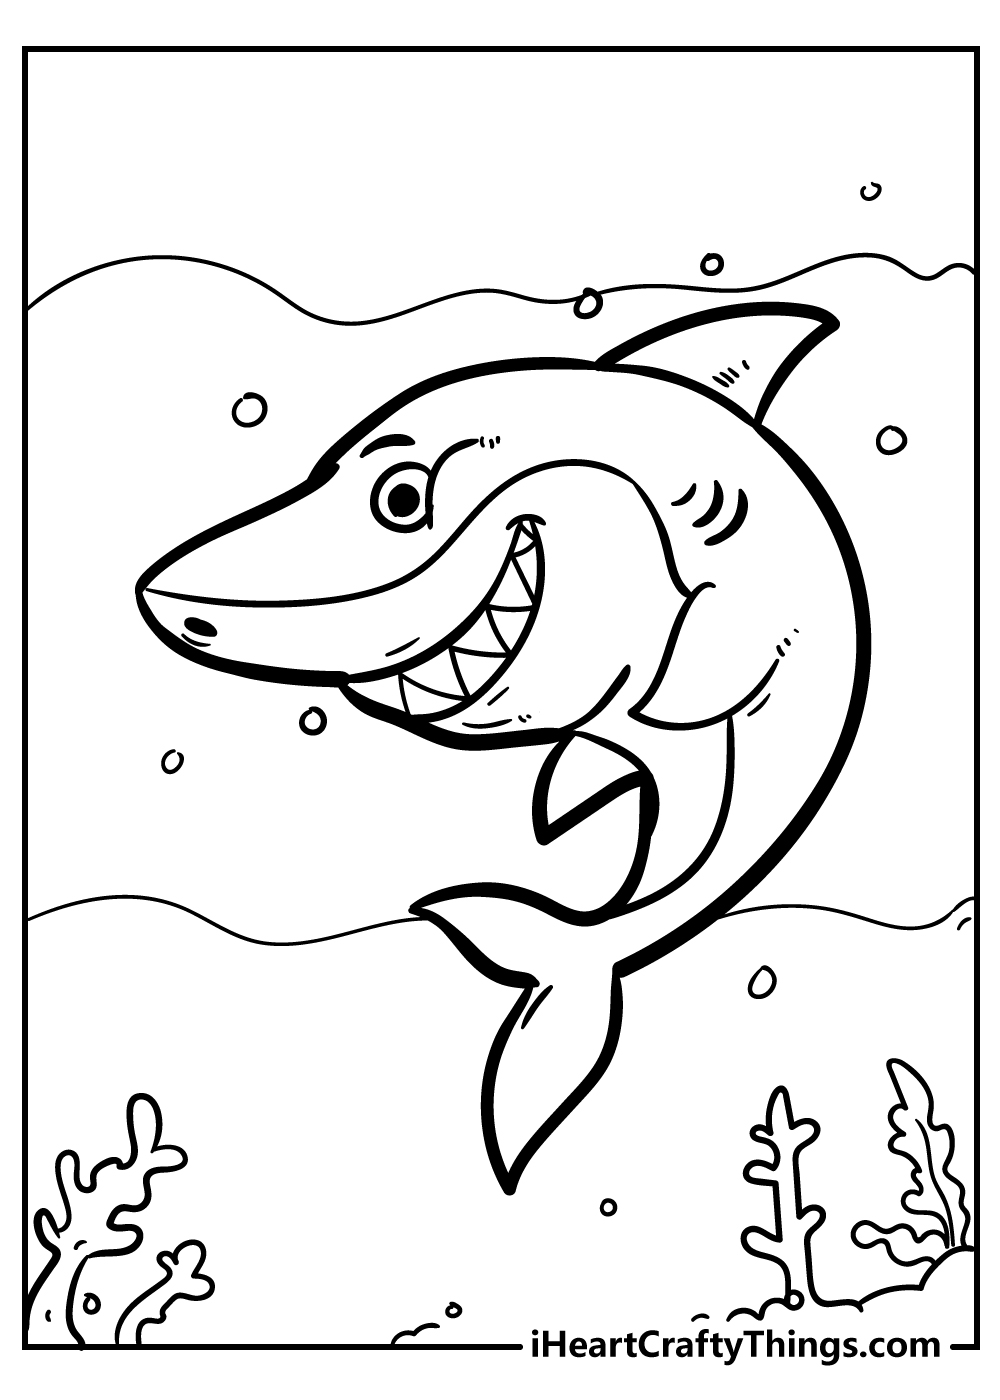 Shark coloring pages for kids free download